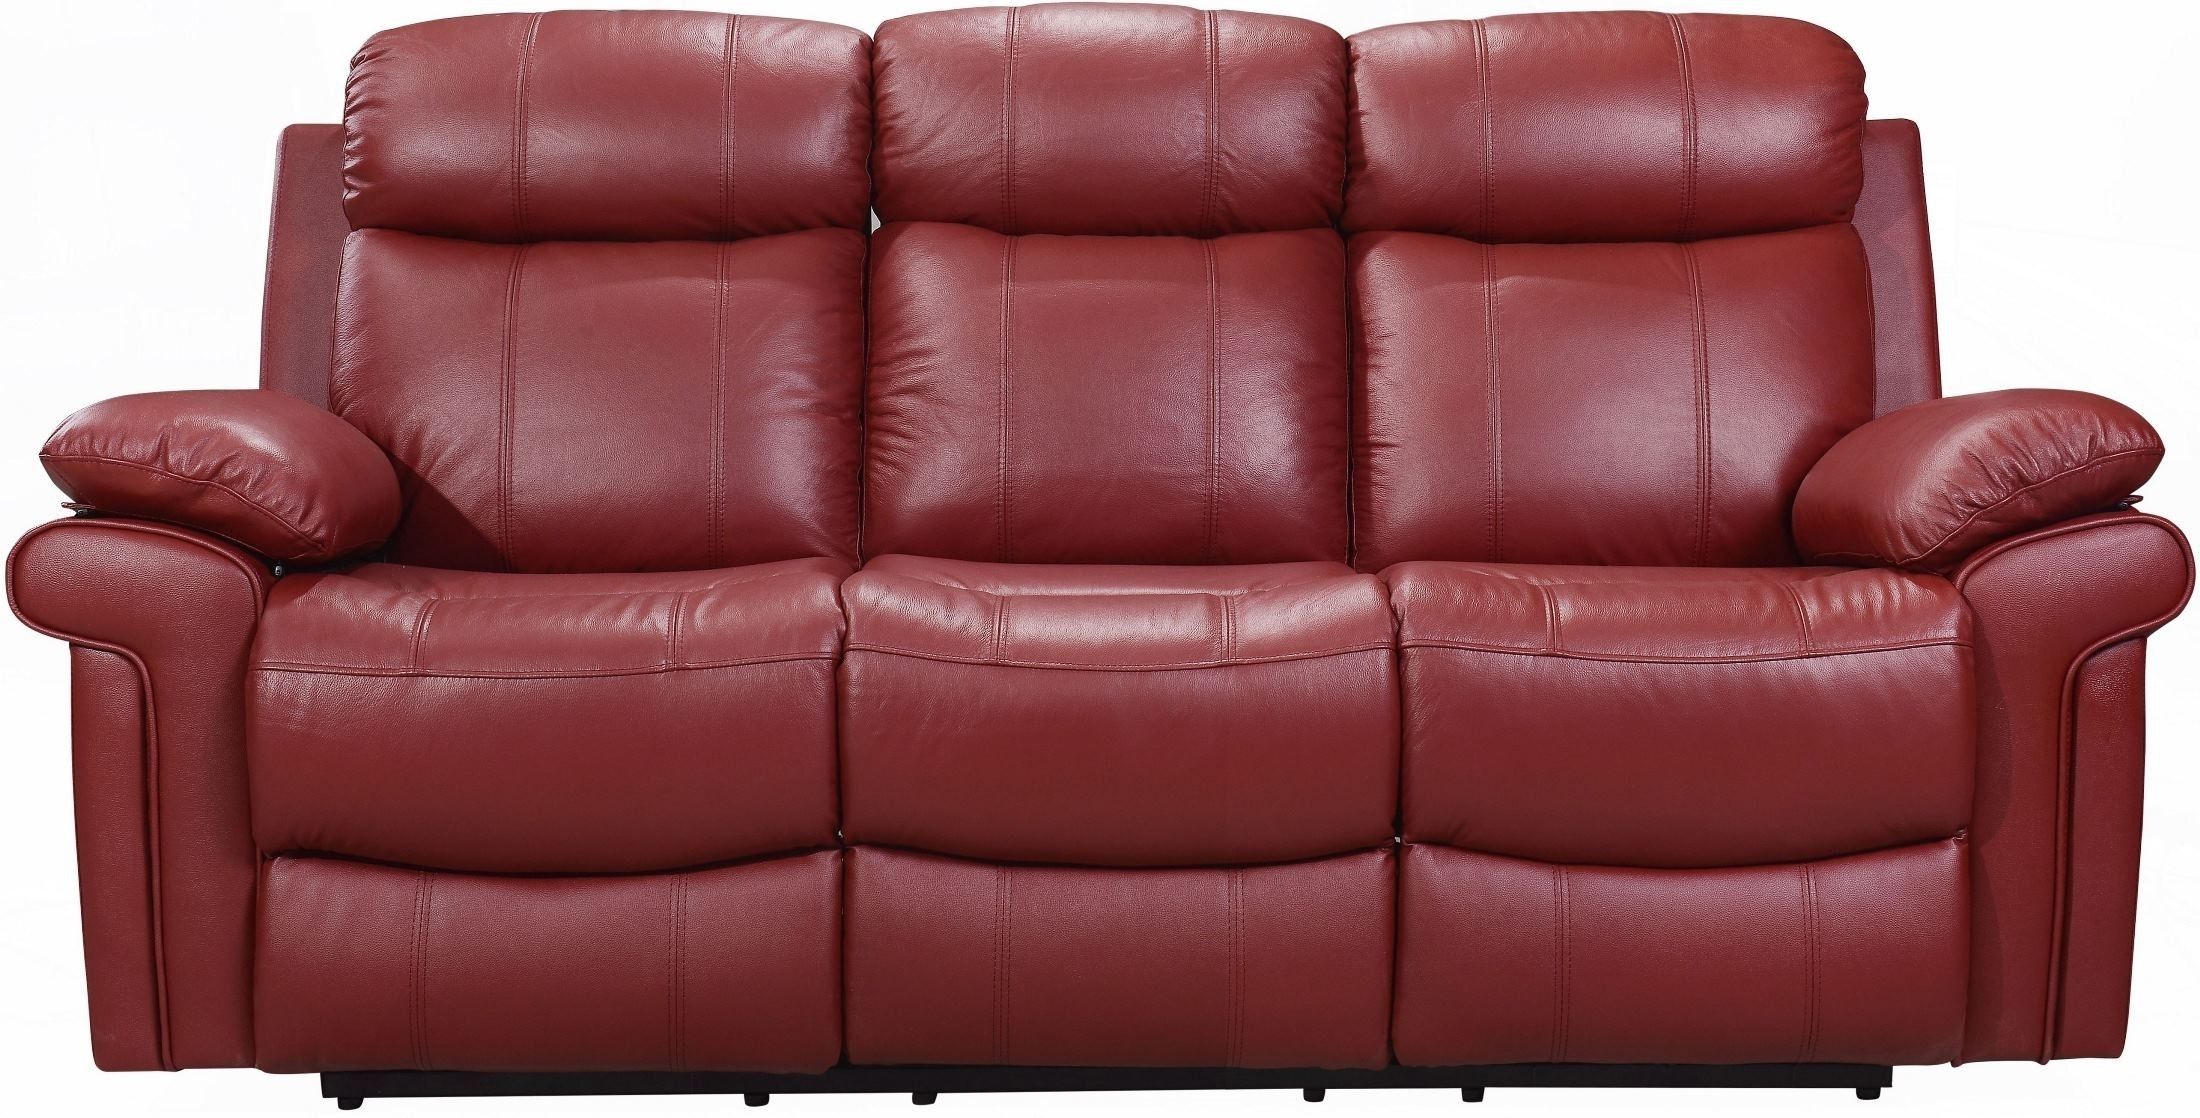 Red Leather Reclining Sofa For Ashley Furniture Remodel 17 Within Red Leather Reclining Sofas And Loveseats (View 10 of 15)